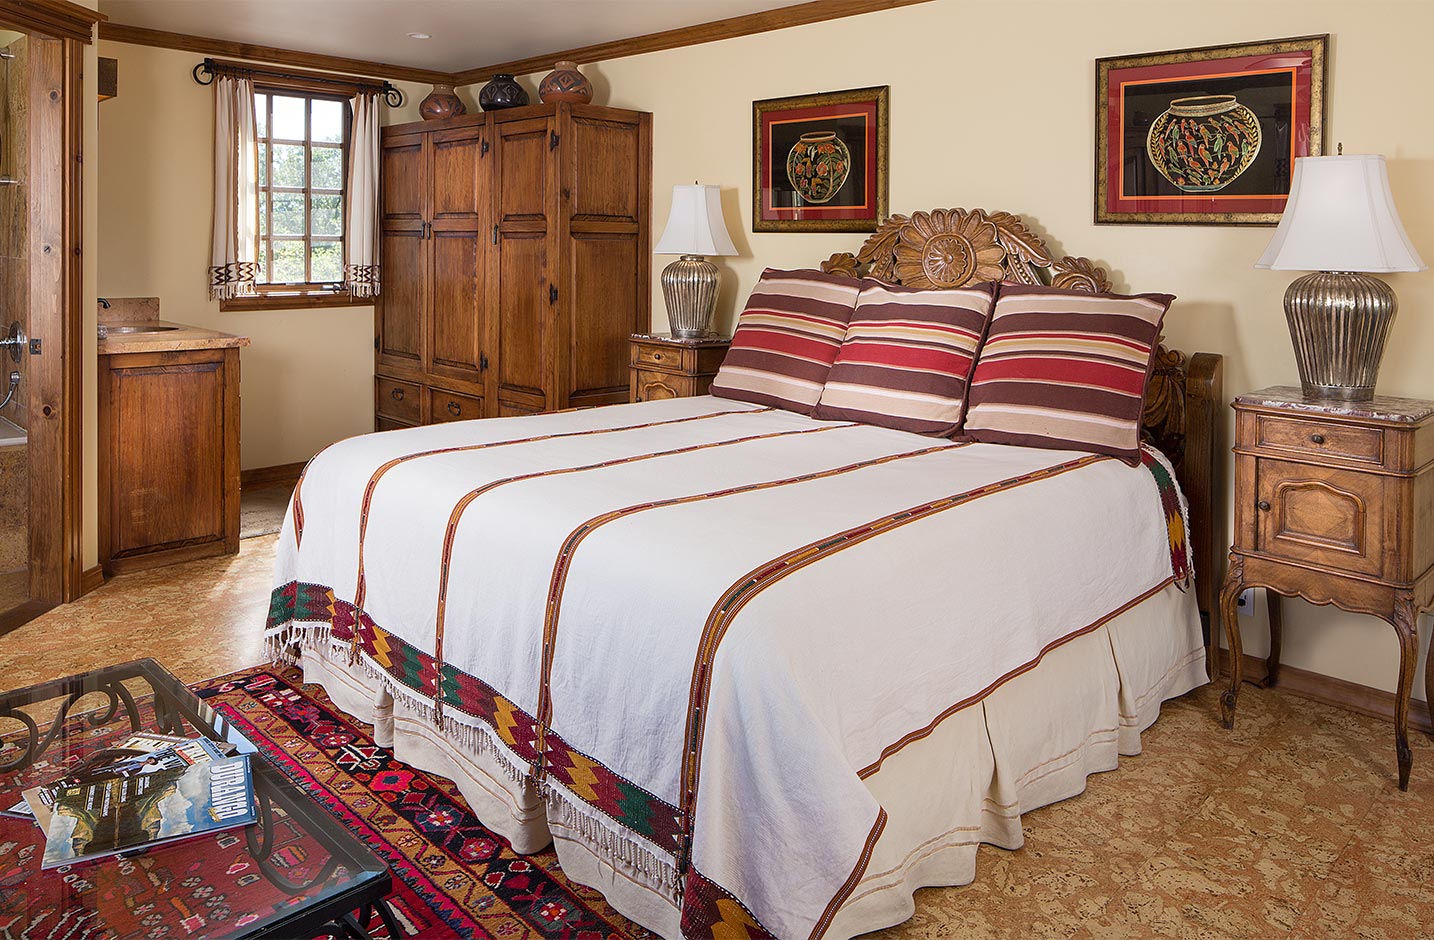 A spacious room with a king bed and side table